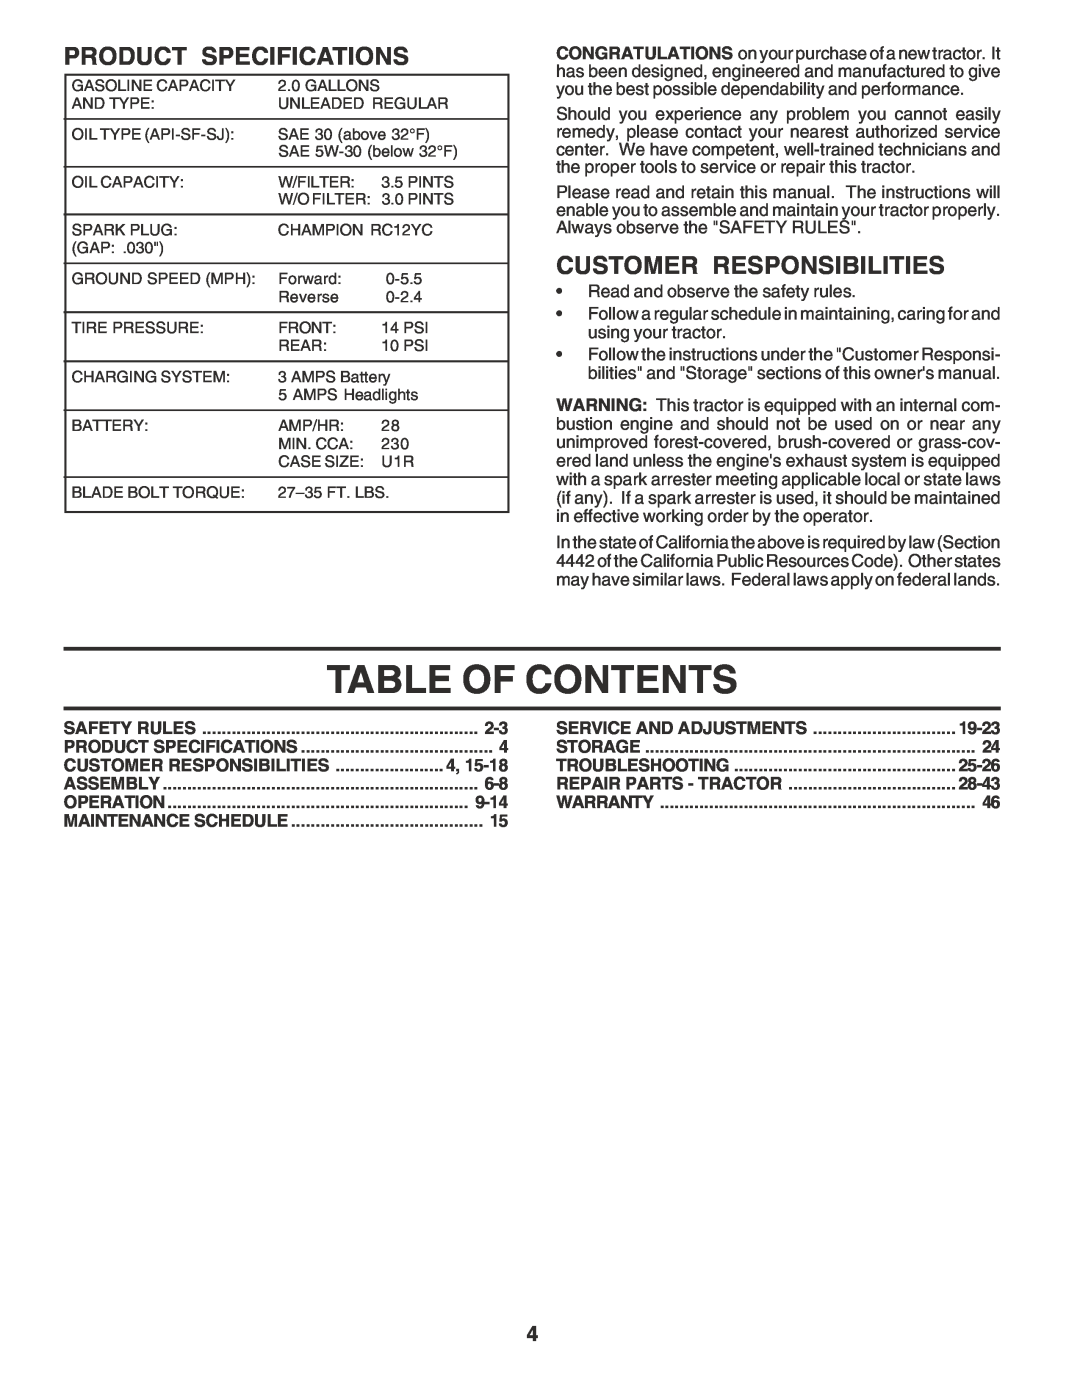 Poulan PR17H42STF owner manual Table Of Contents, Product Specifications, Customer Responsibilities 